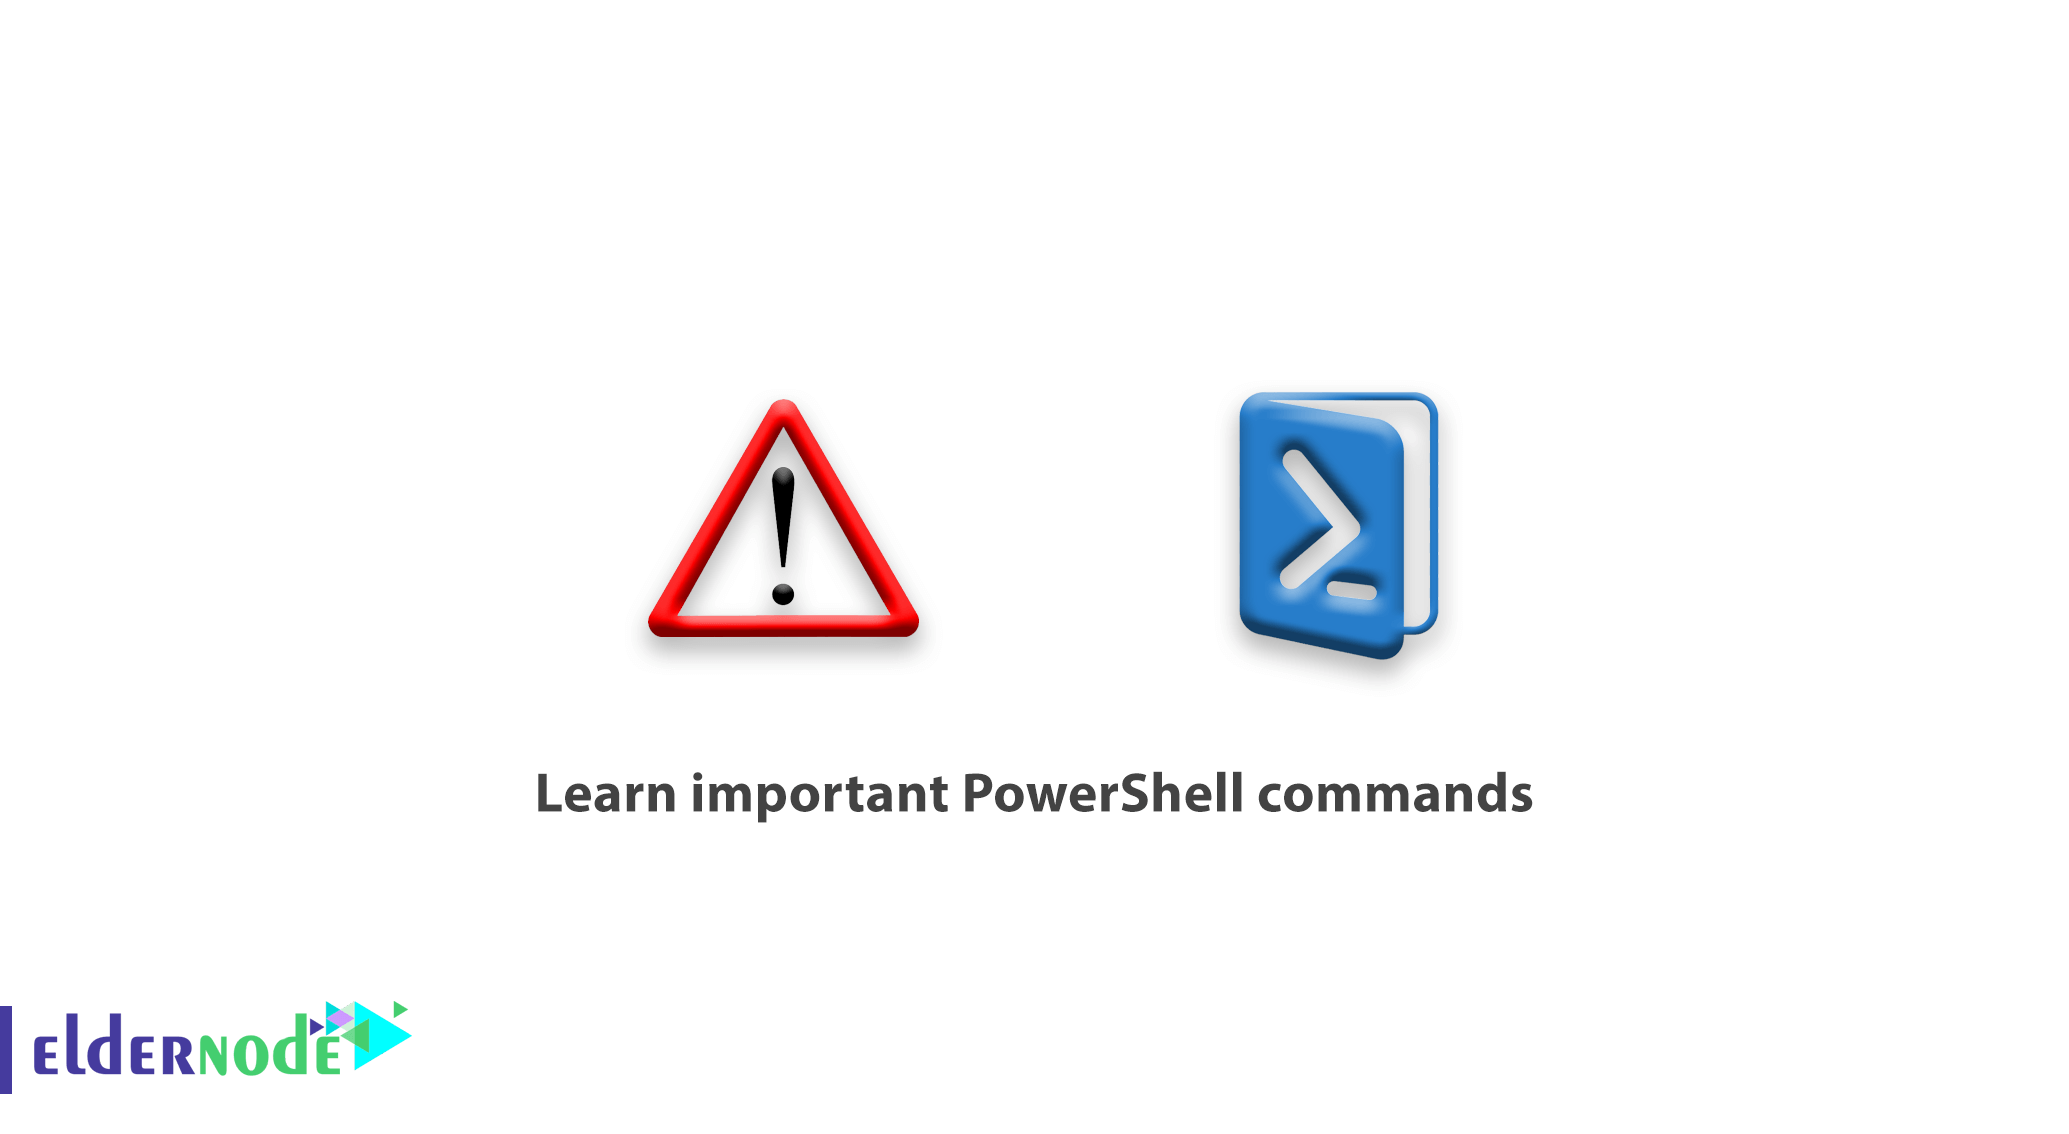 Learn important PowerShell commands